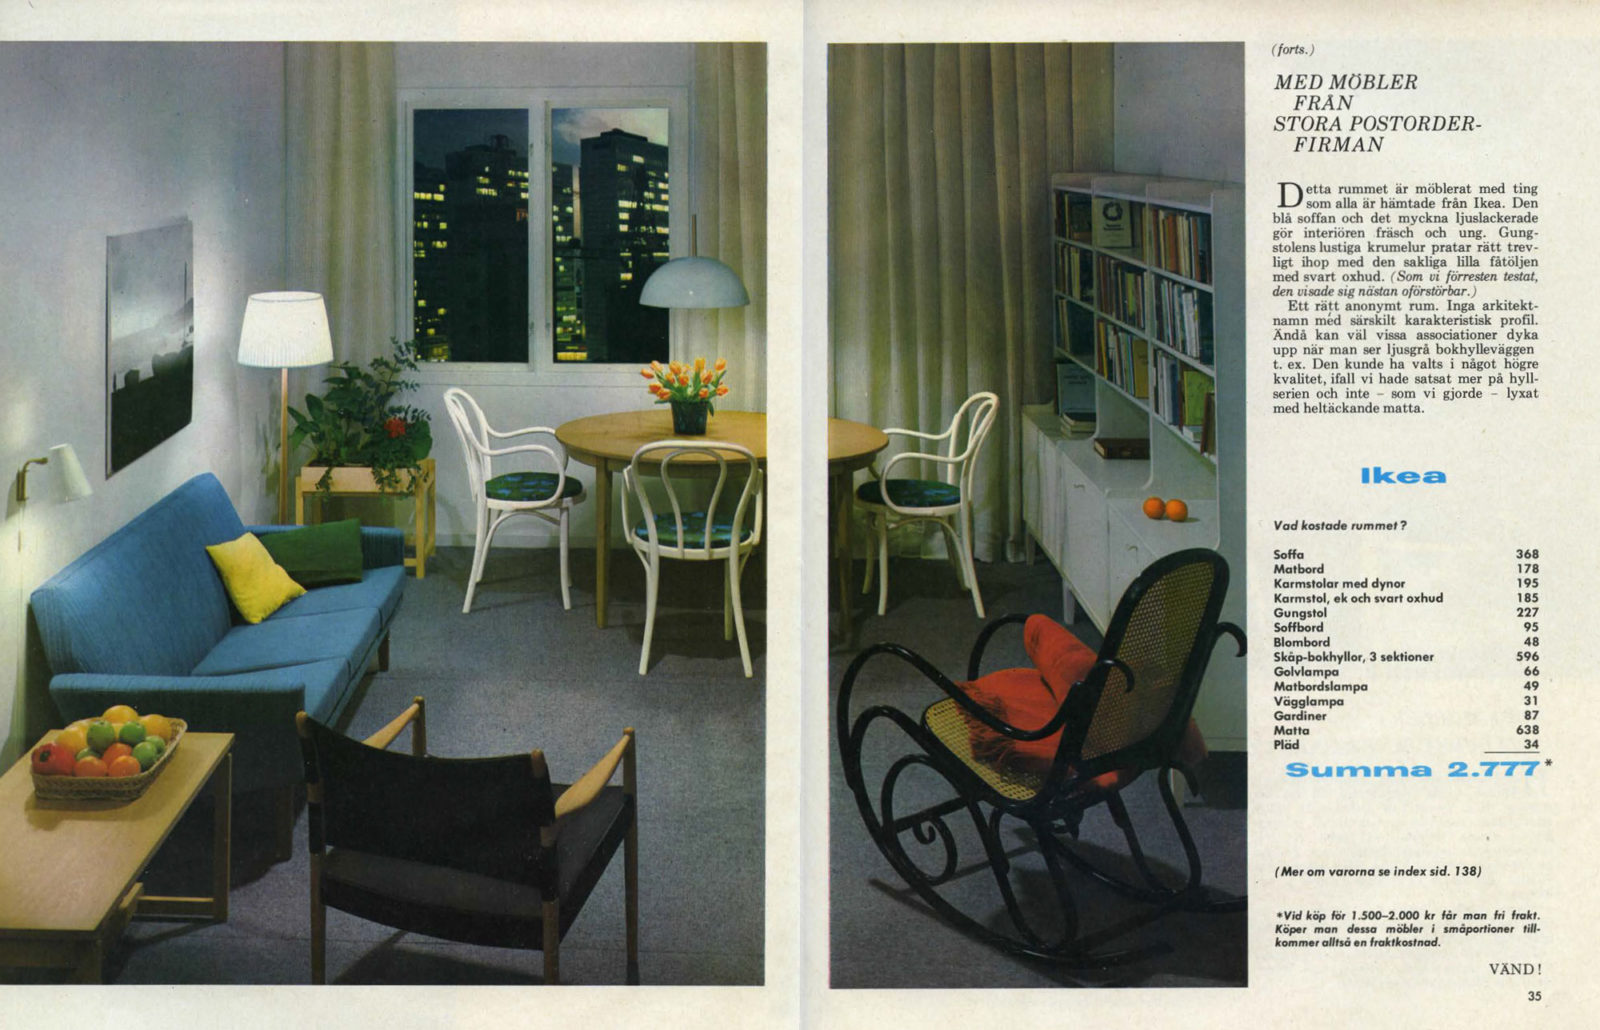 Magazine page with photo of 1960s living room and text on choosing and testing ´furniture from mail order company´ IKEA.